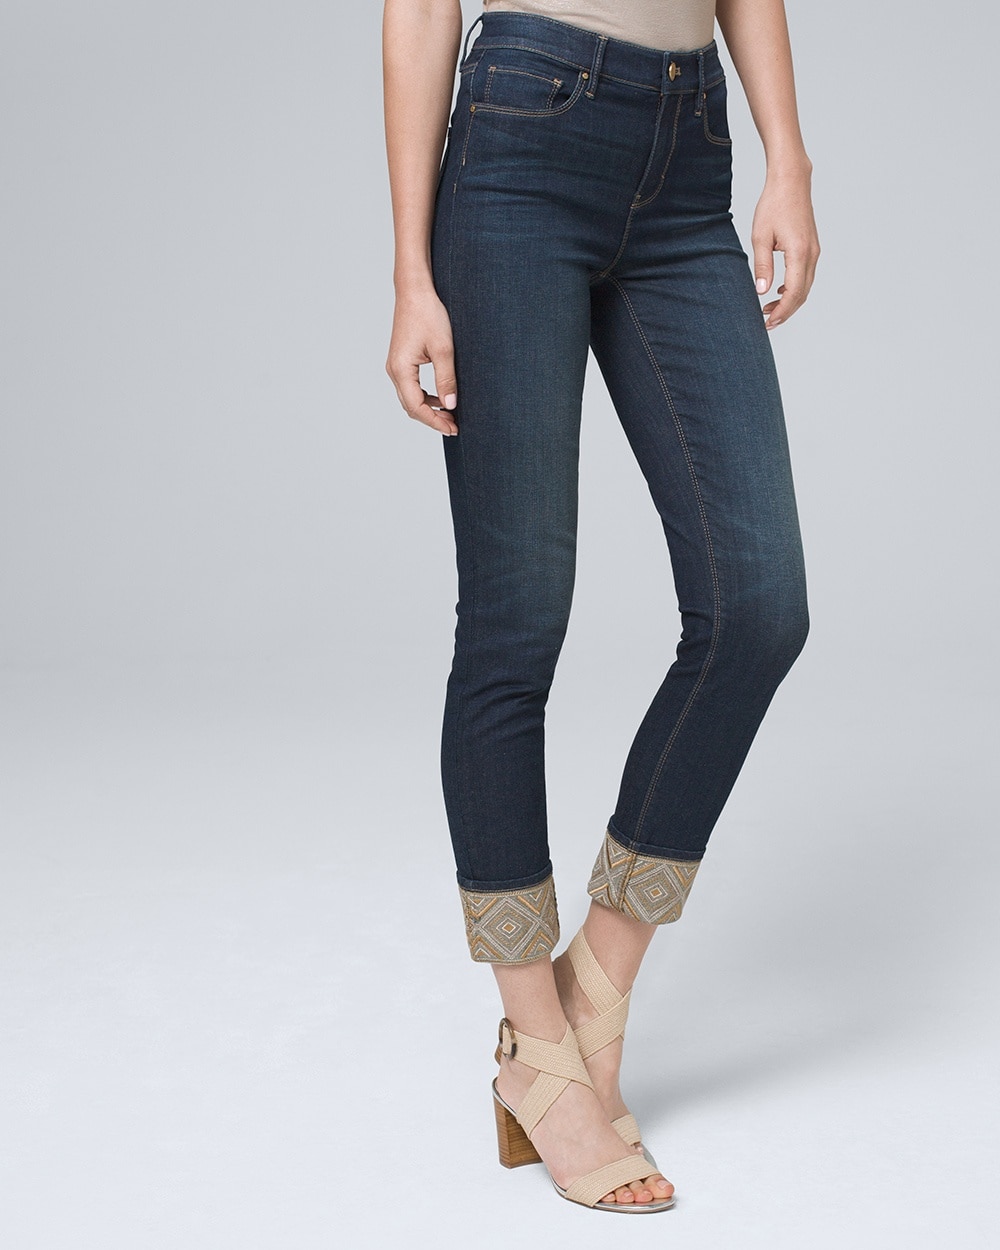 jeans with embroidered cuff